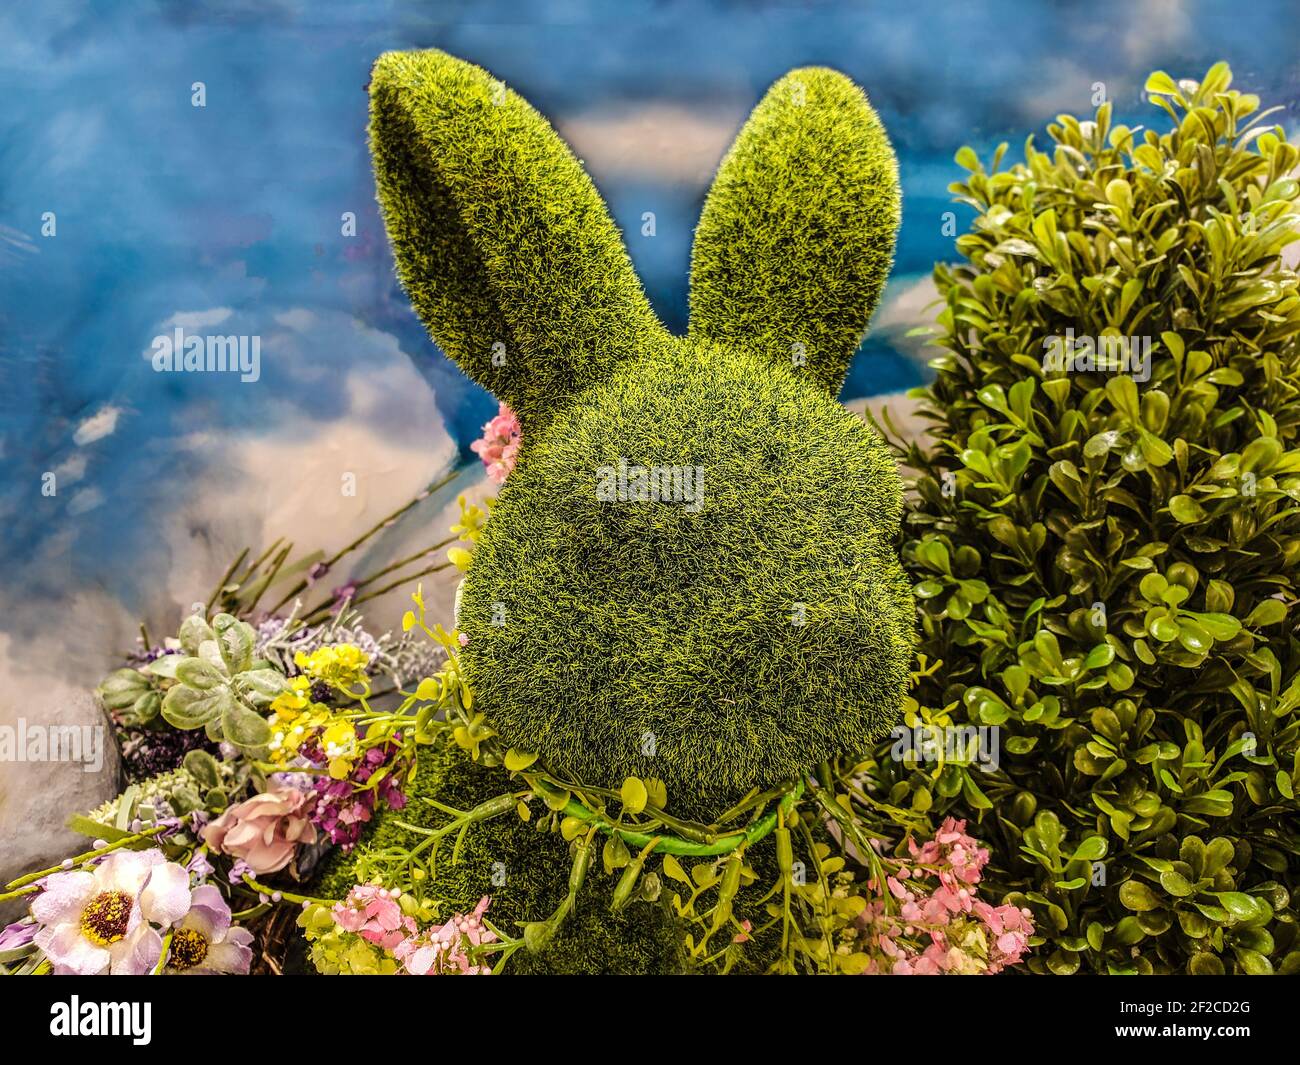 Decorative green topiary rabbit head with flowers around its neck and surrounded by greenery in front of blue sky-like background - Great for spring o Stock Photo